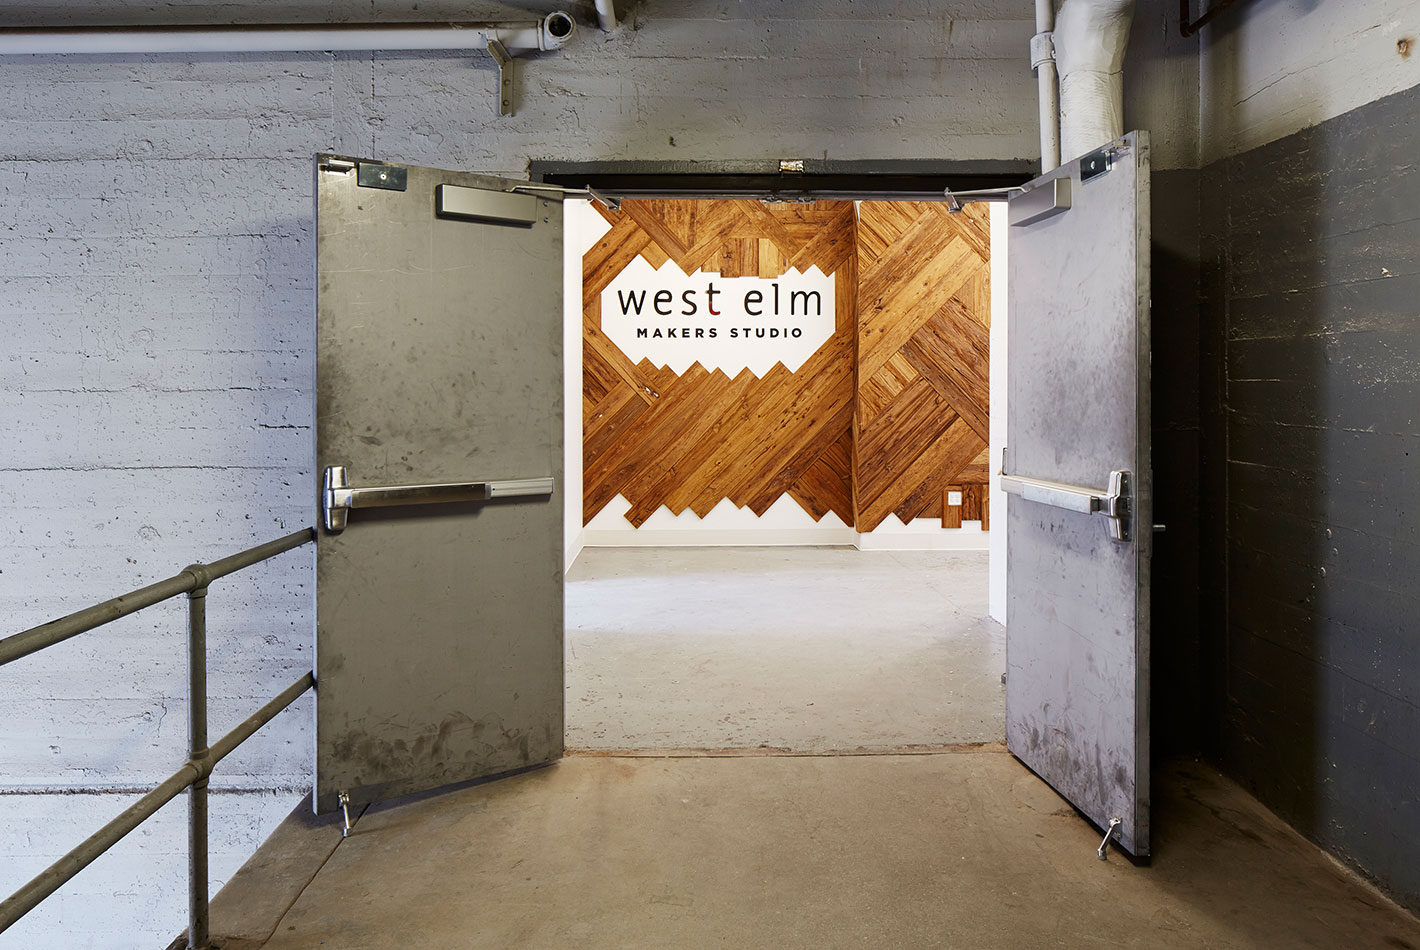 West Elm's logo rendered on a white wall with signature wood paneling at West Elm's Maker's Studio